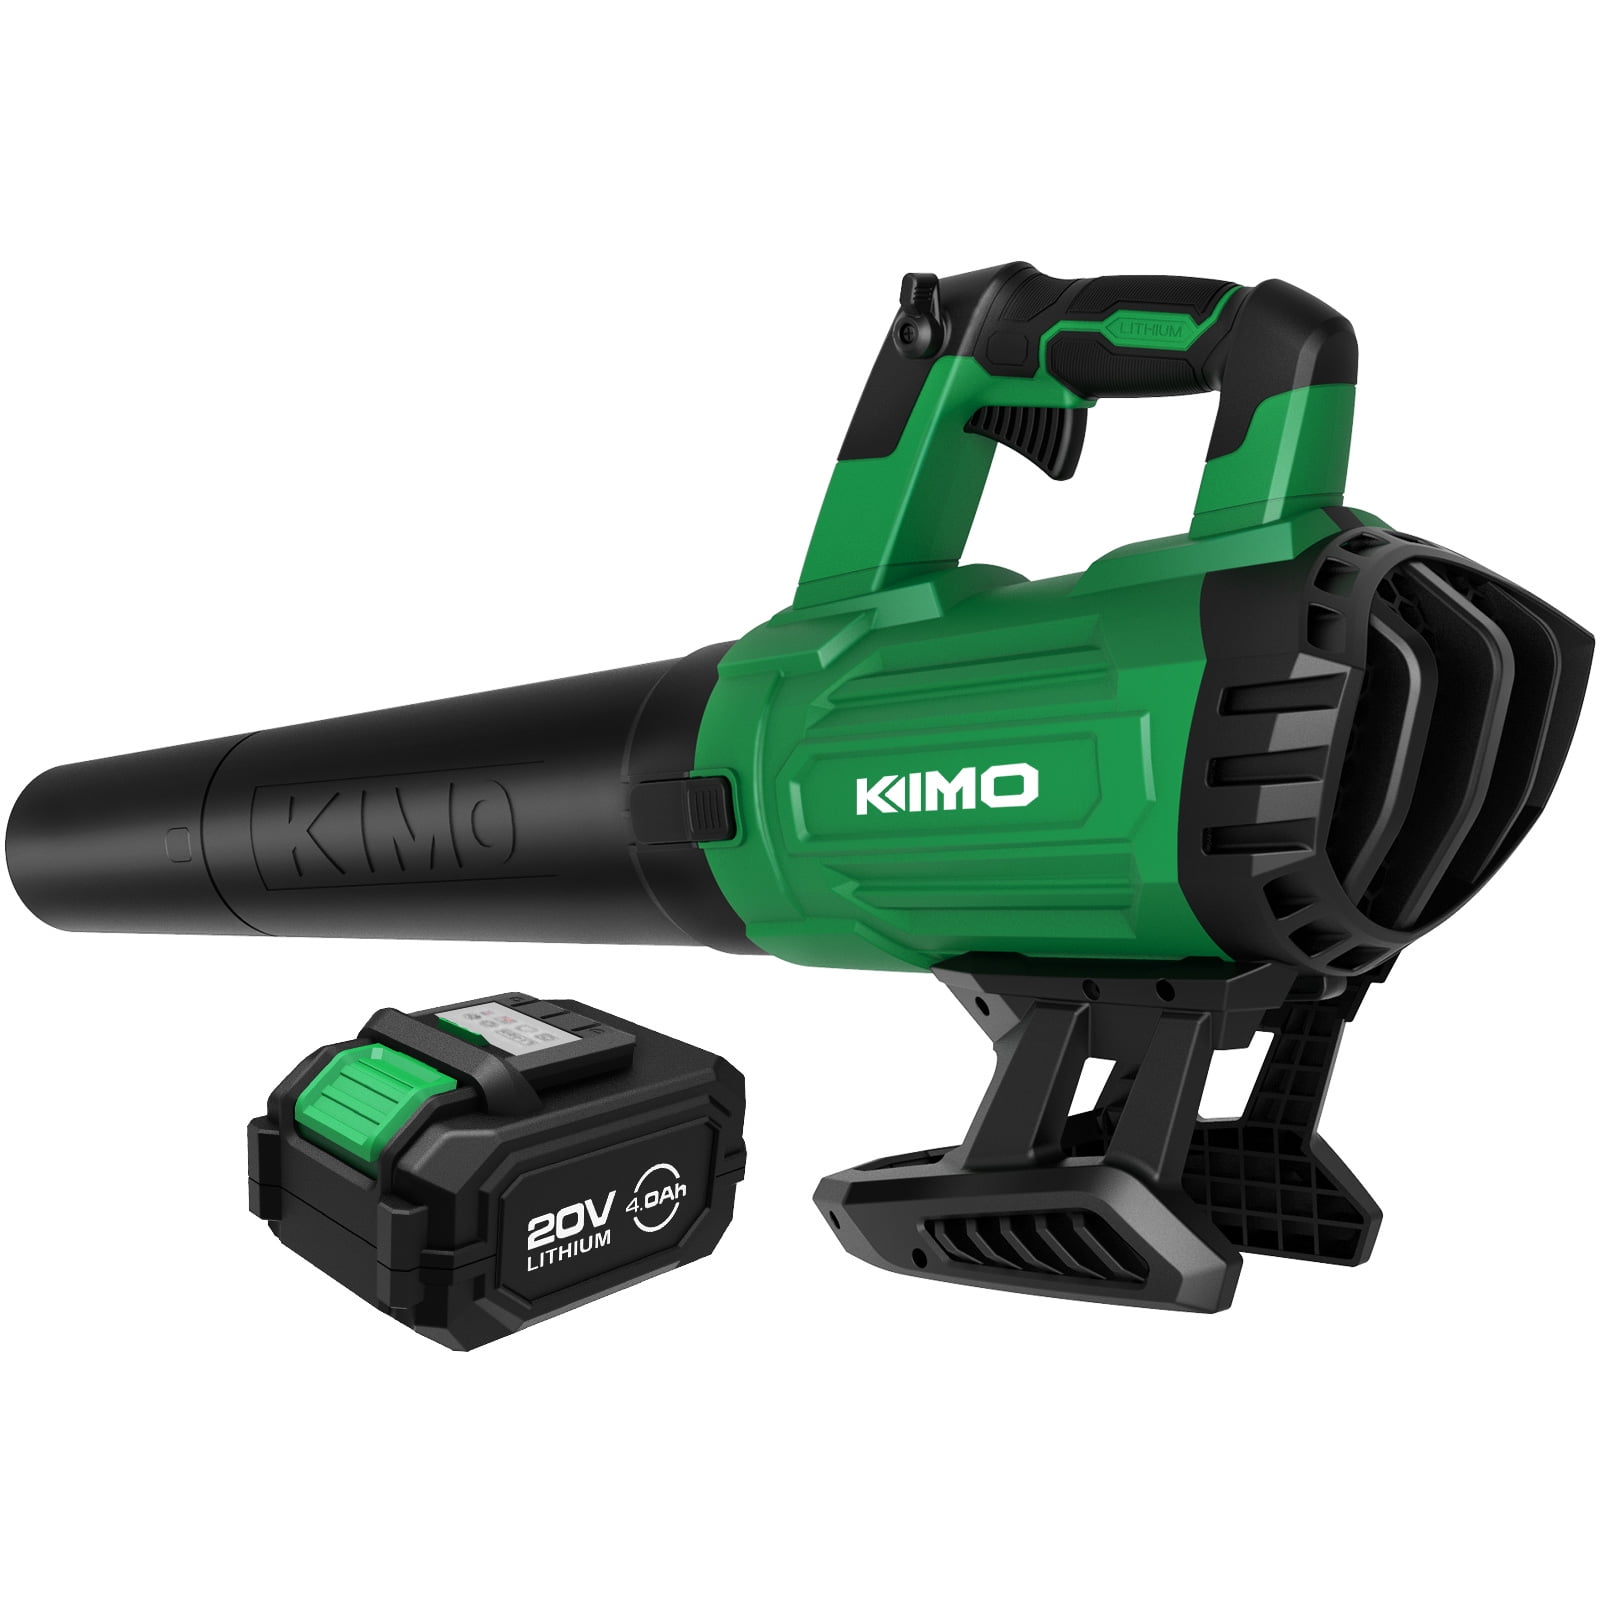 KIMO Cordless Leaf Blower, 20V 4.0Ah Battery Powered Blower Sweeper, 400CFM for Blowing Leaf/Snow, Dusting, Drying Car, Cleaning Garden/Patio/Lawn